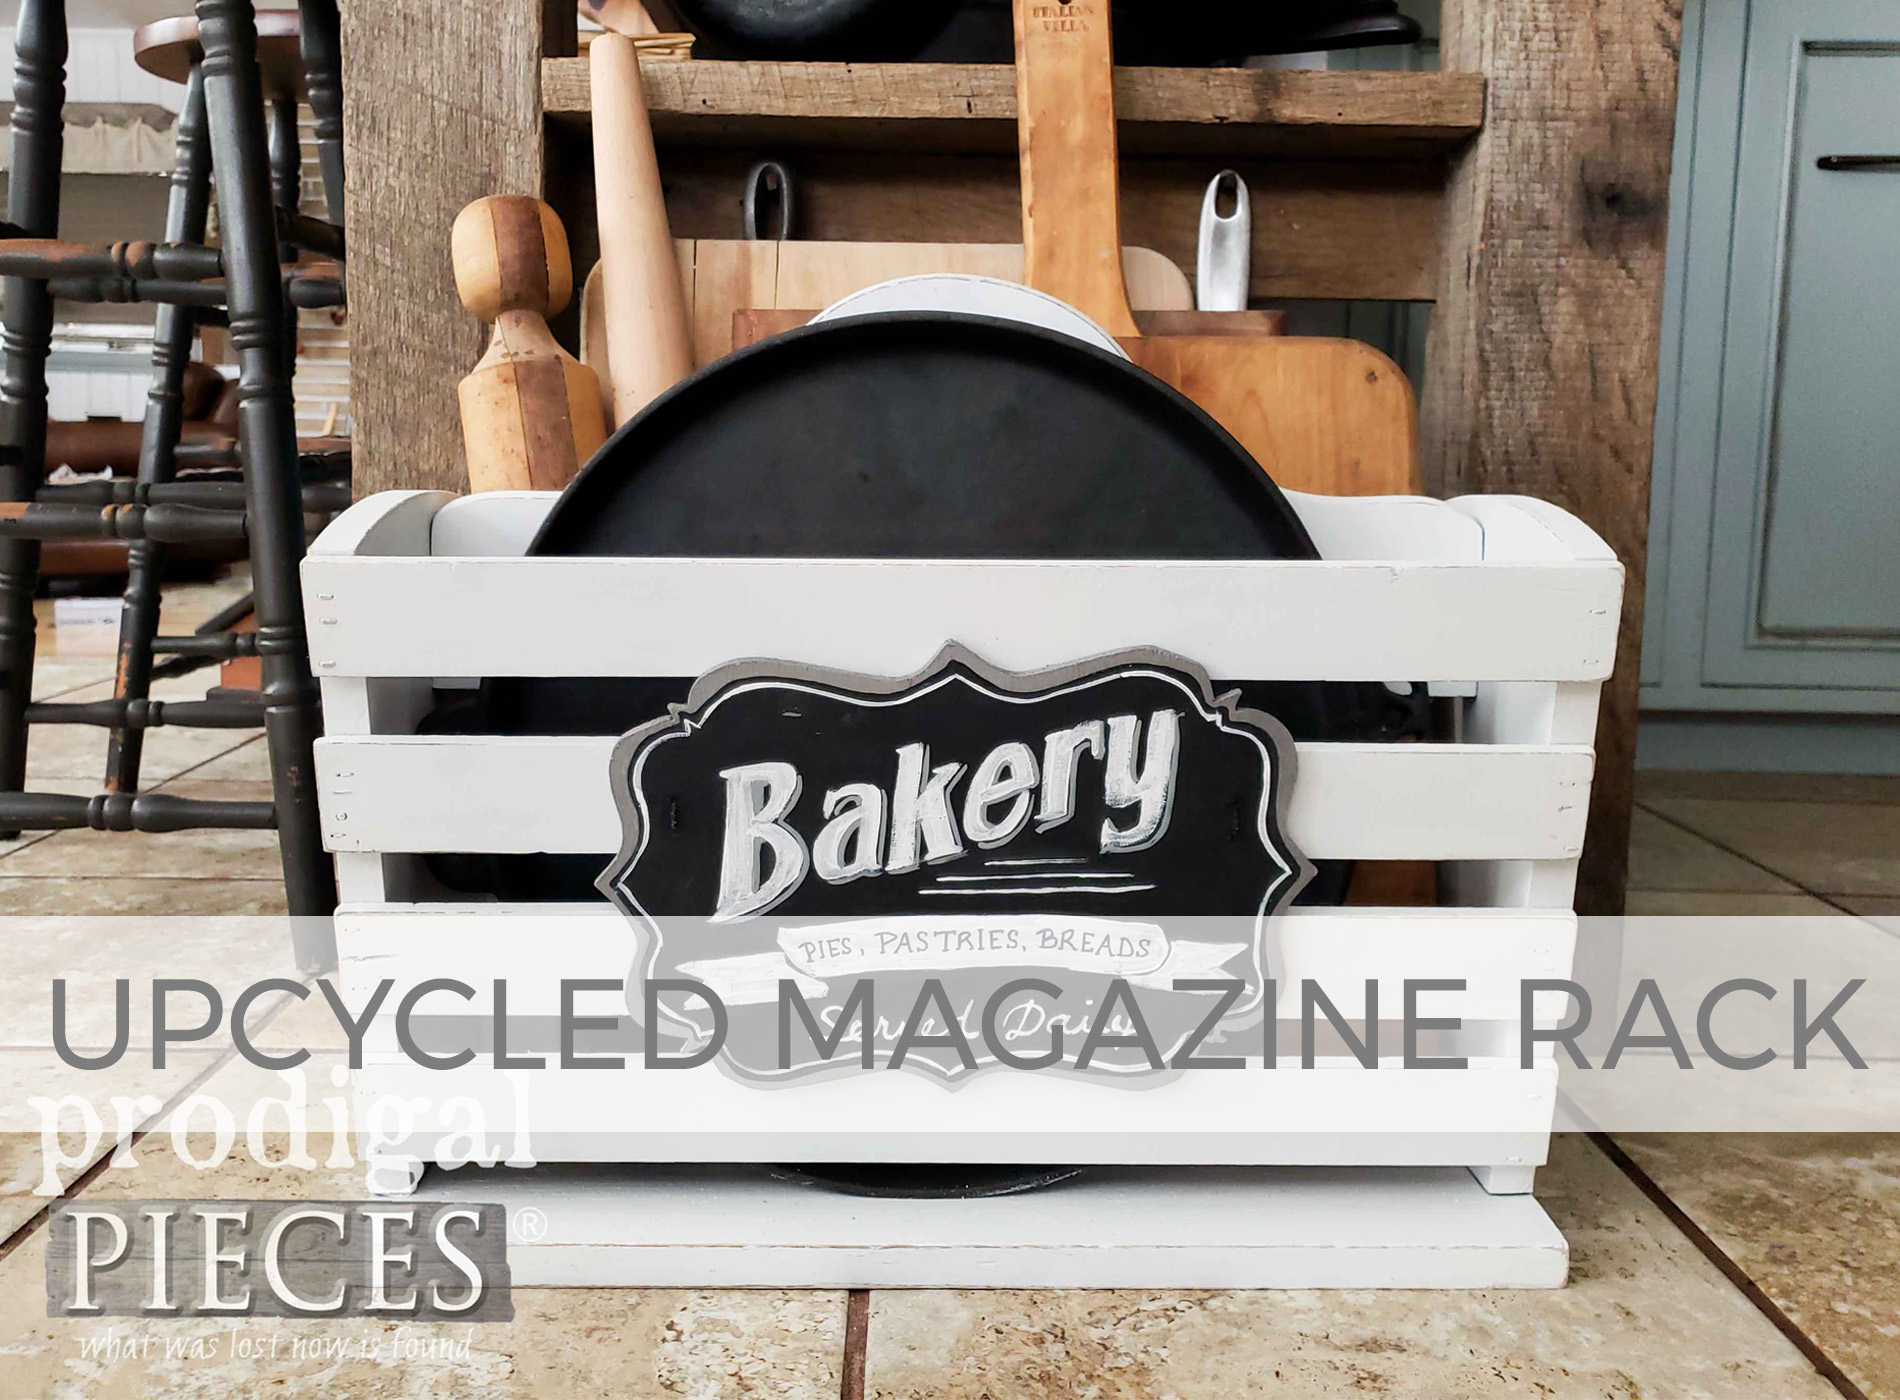 Upcycled Magazine Rack for Kitchen Decor by Larissa of Prodigal Pieces | prodigalpieces.com